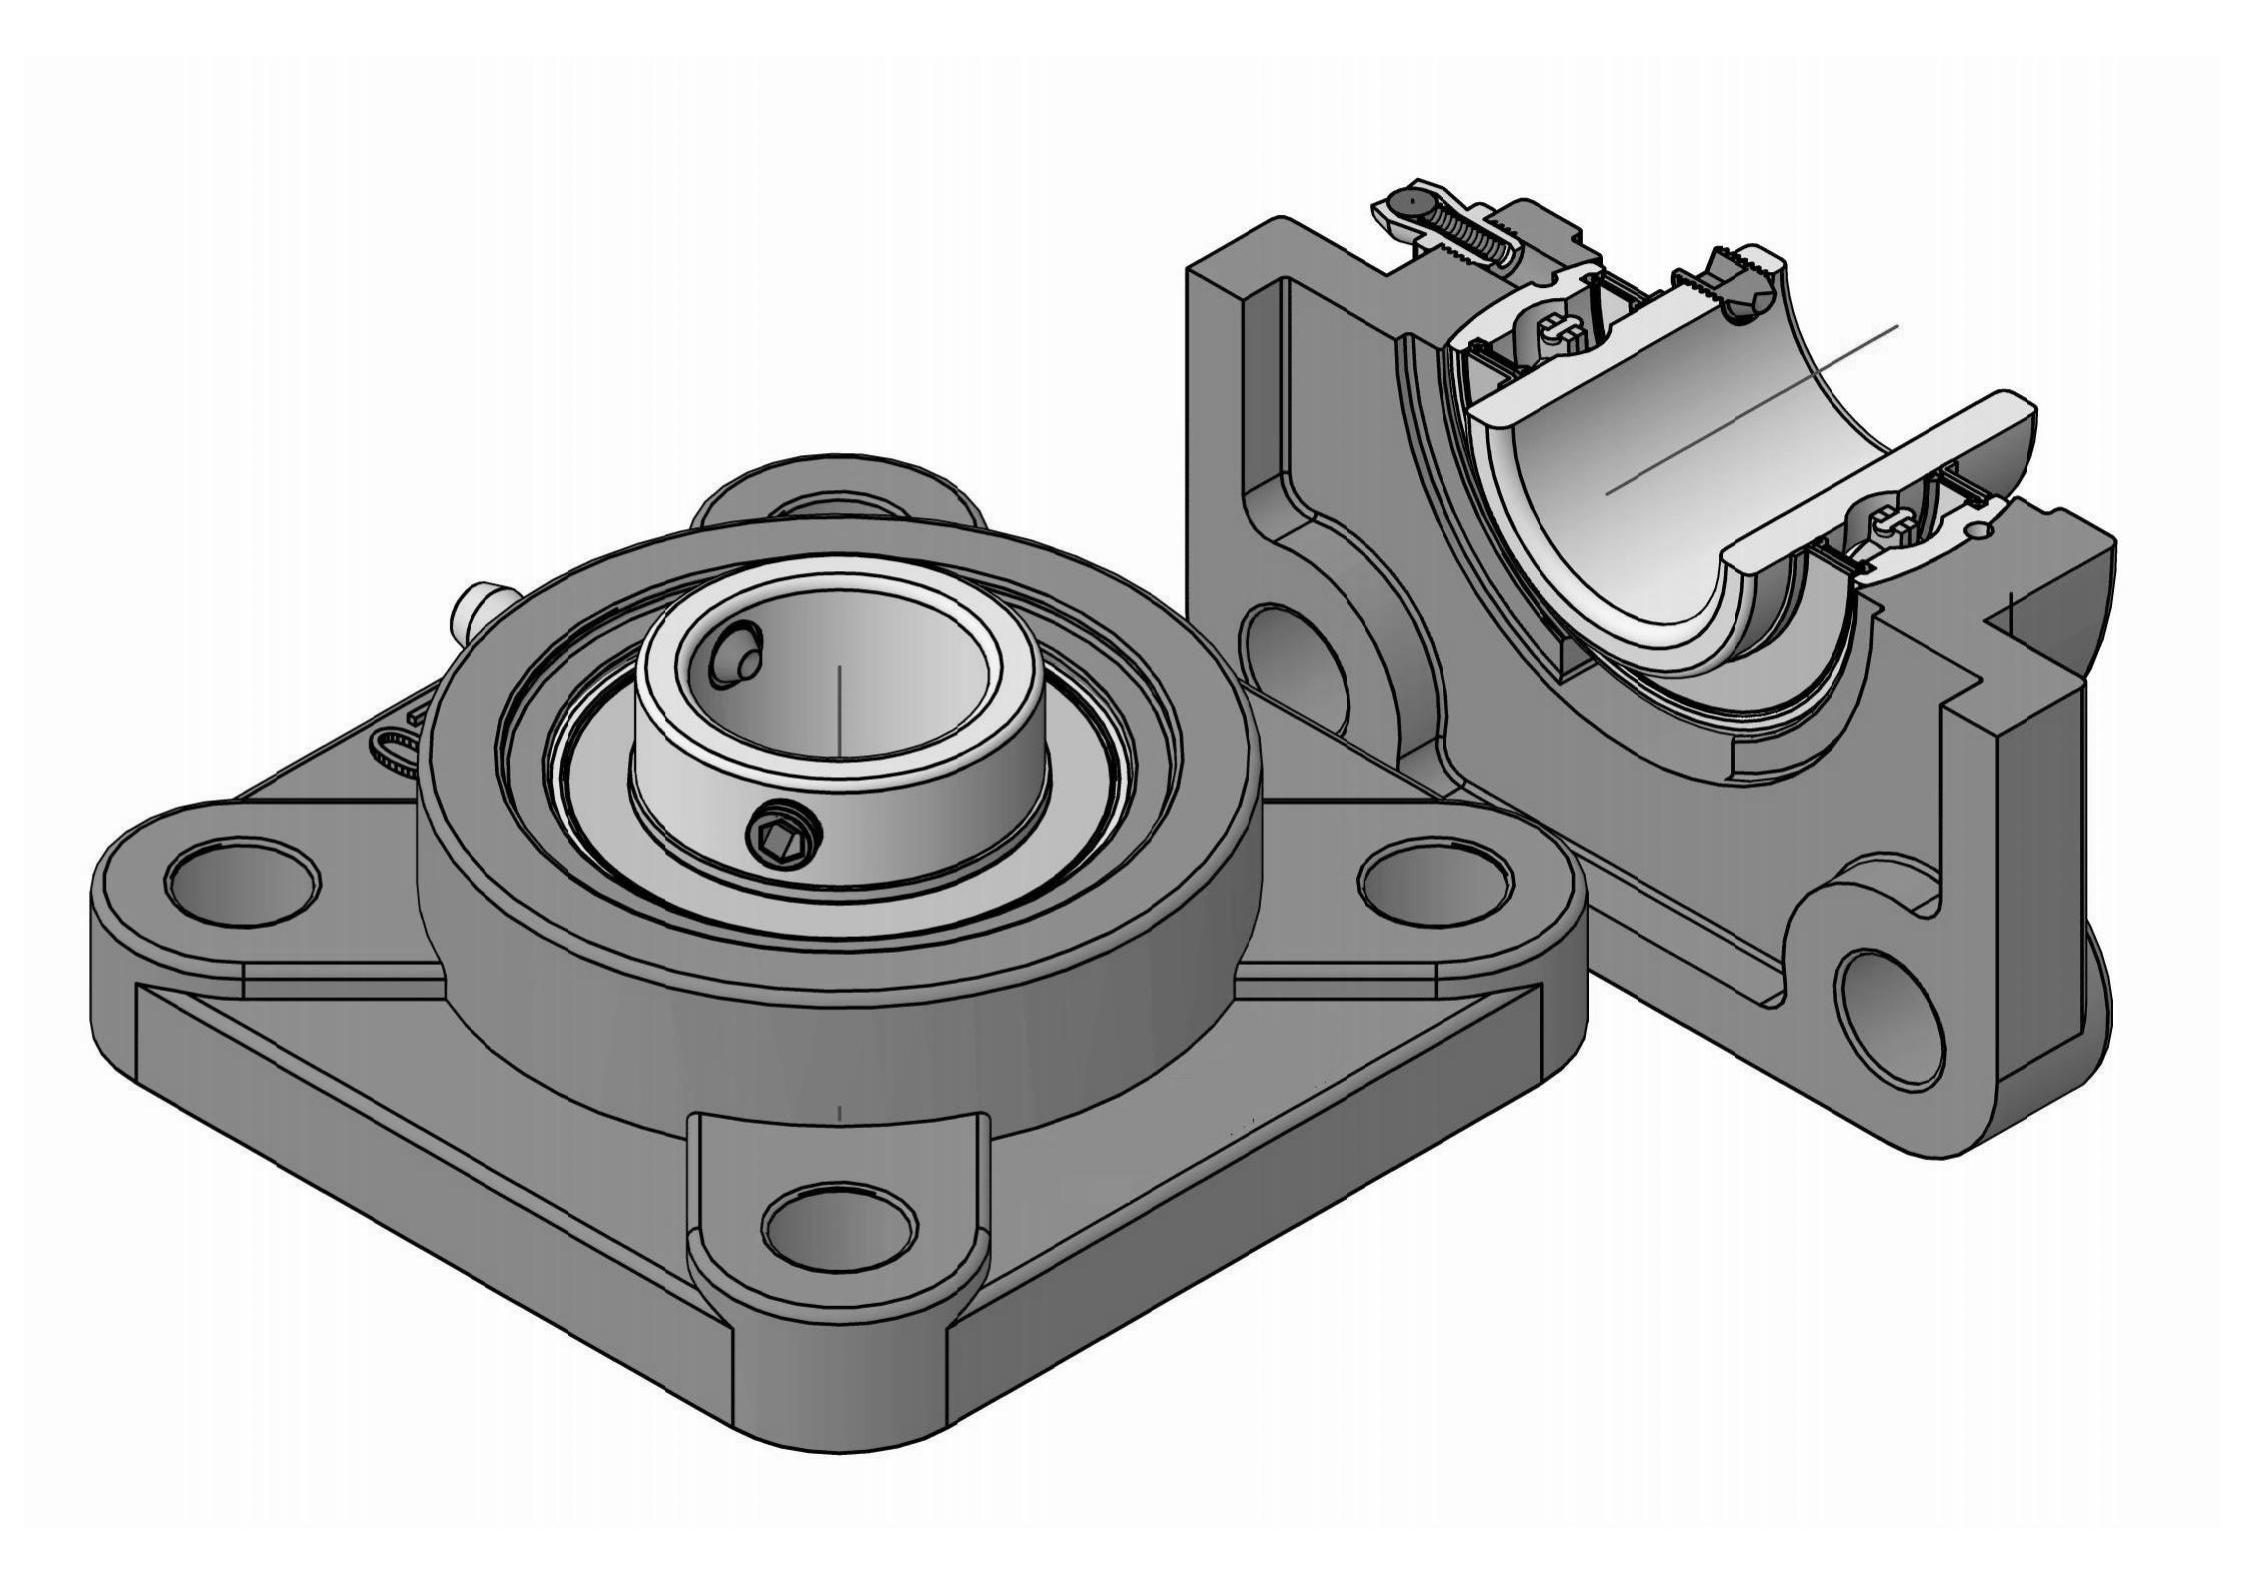 UCFX07-23 four Bolt Square flange bearing units with 1-7/16 inch bore